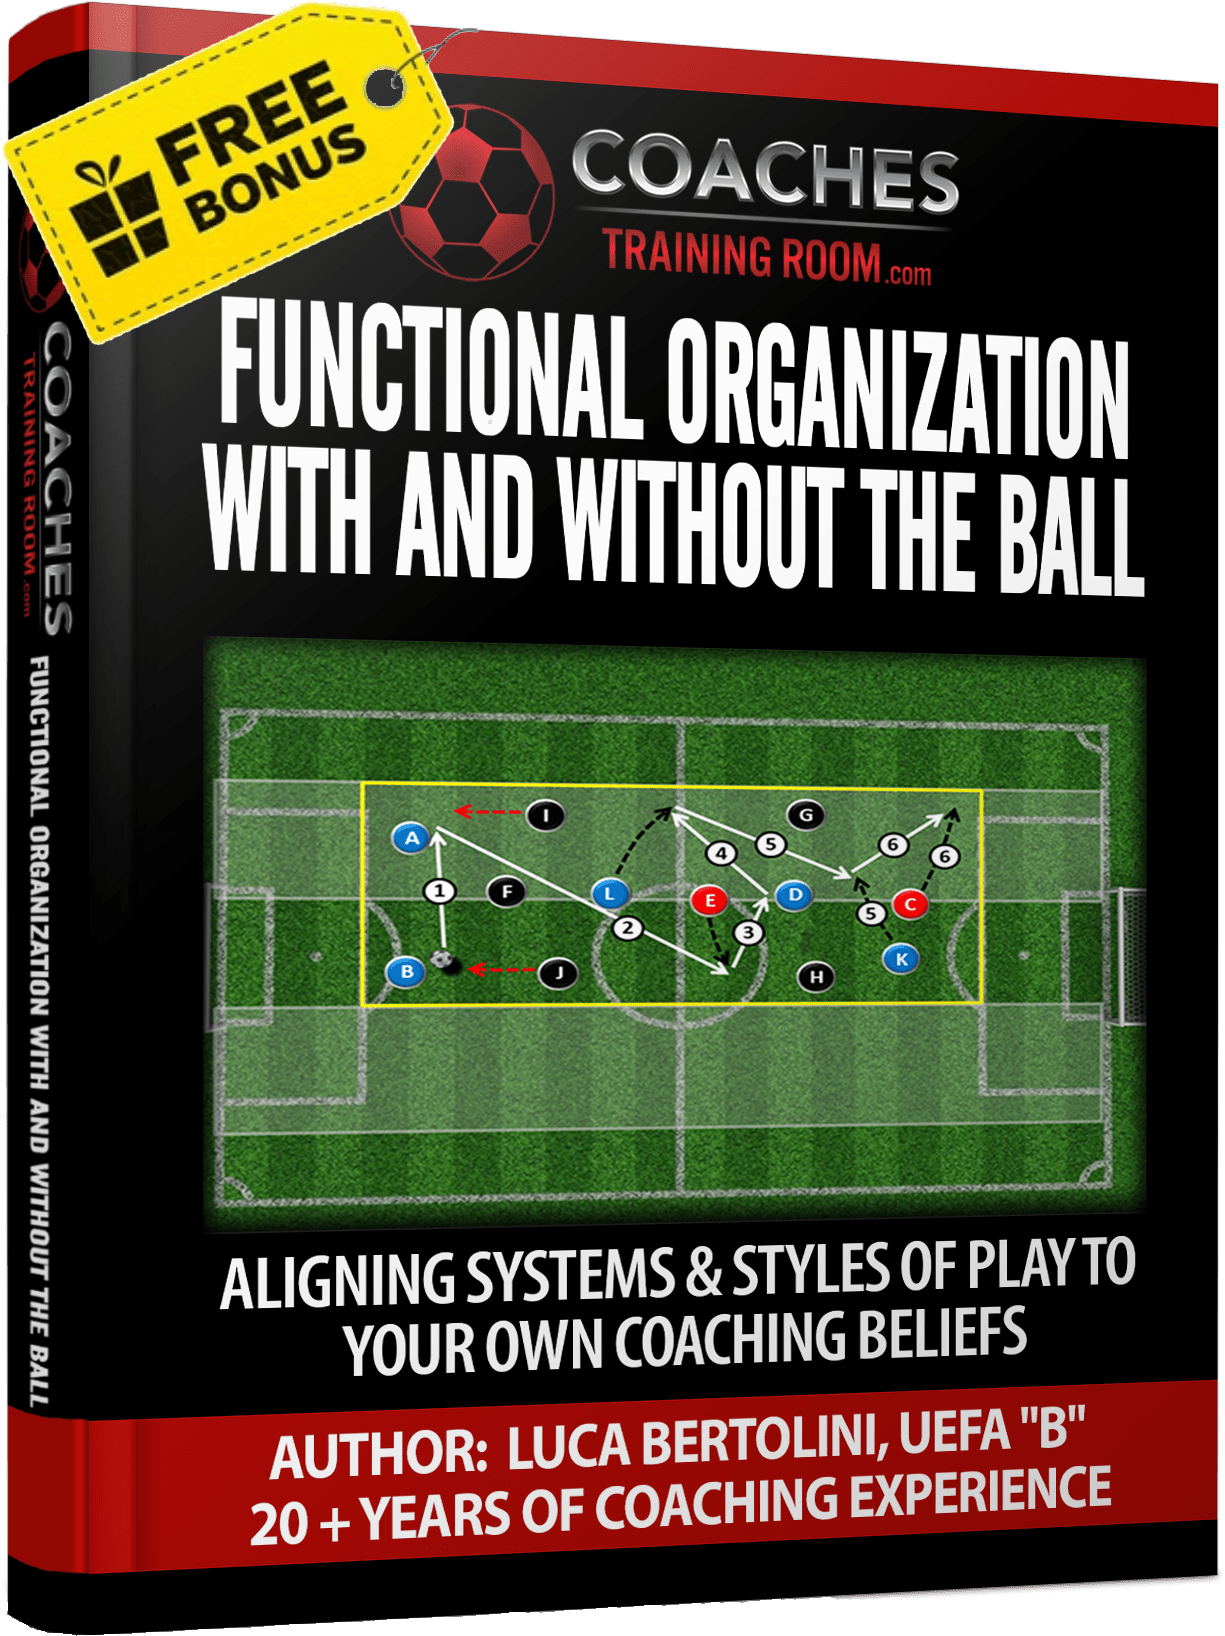 Functional Organization With And Without The Ball - Aligning Systems and Styles of Play to Your Own Coaching Beliefs Ebook by Coaches Training Room